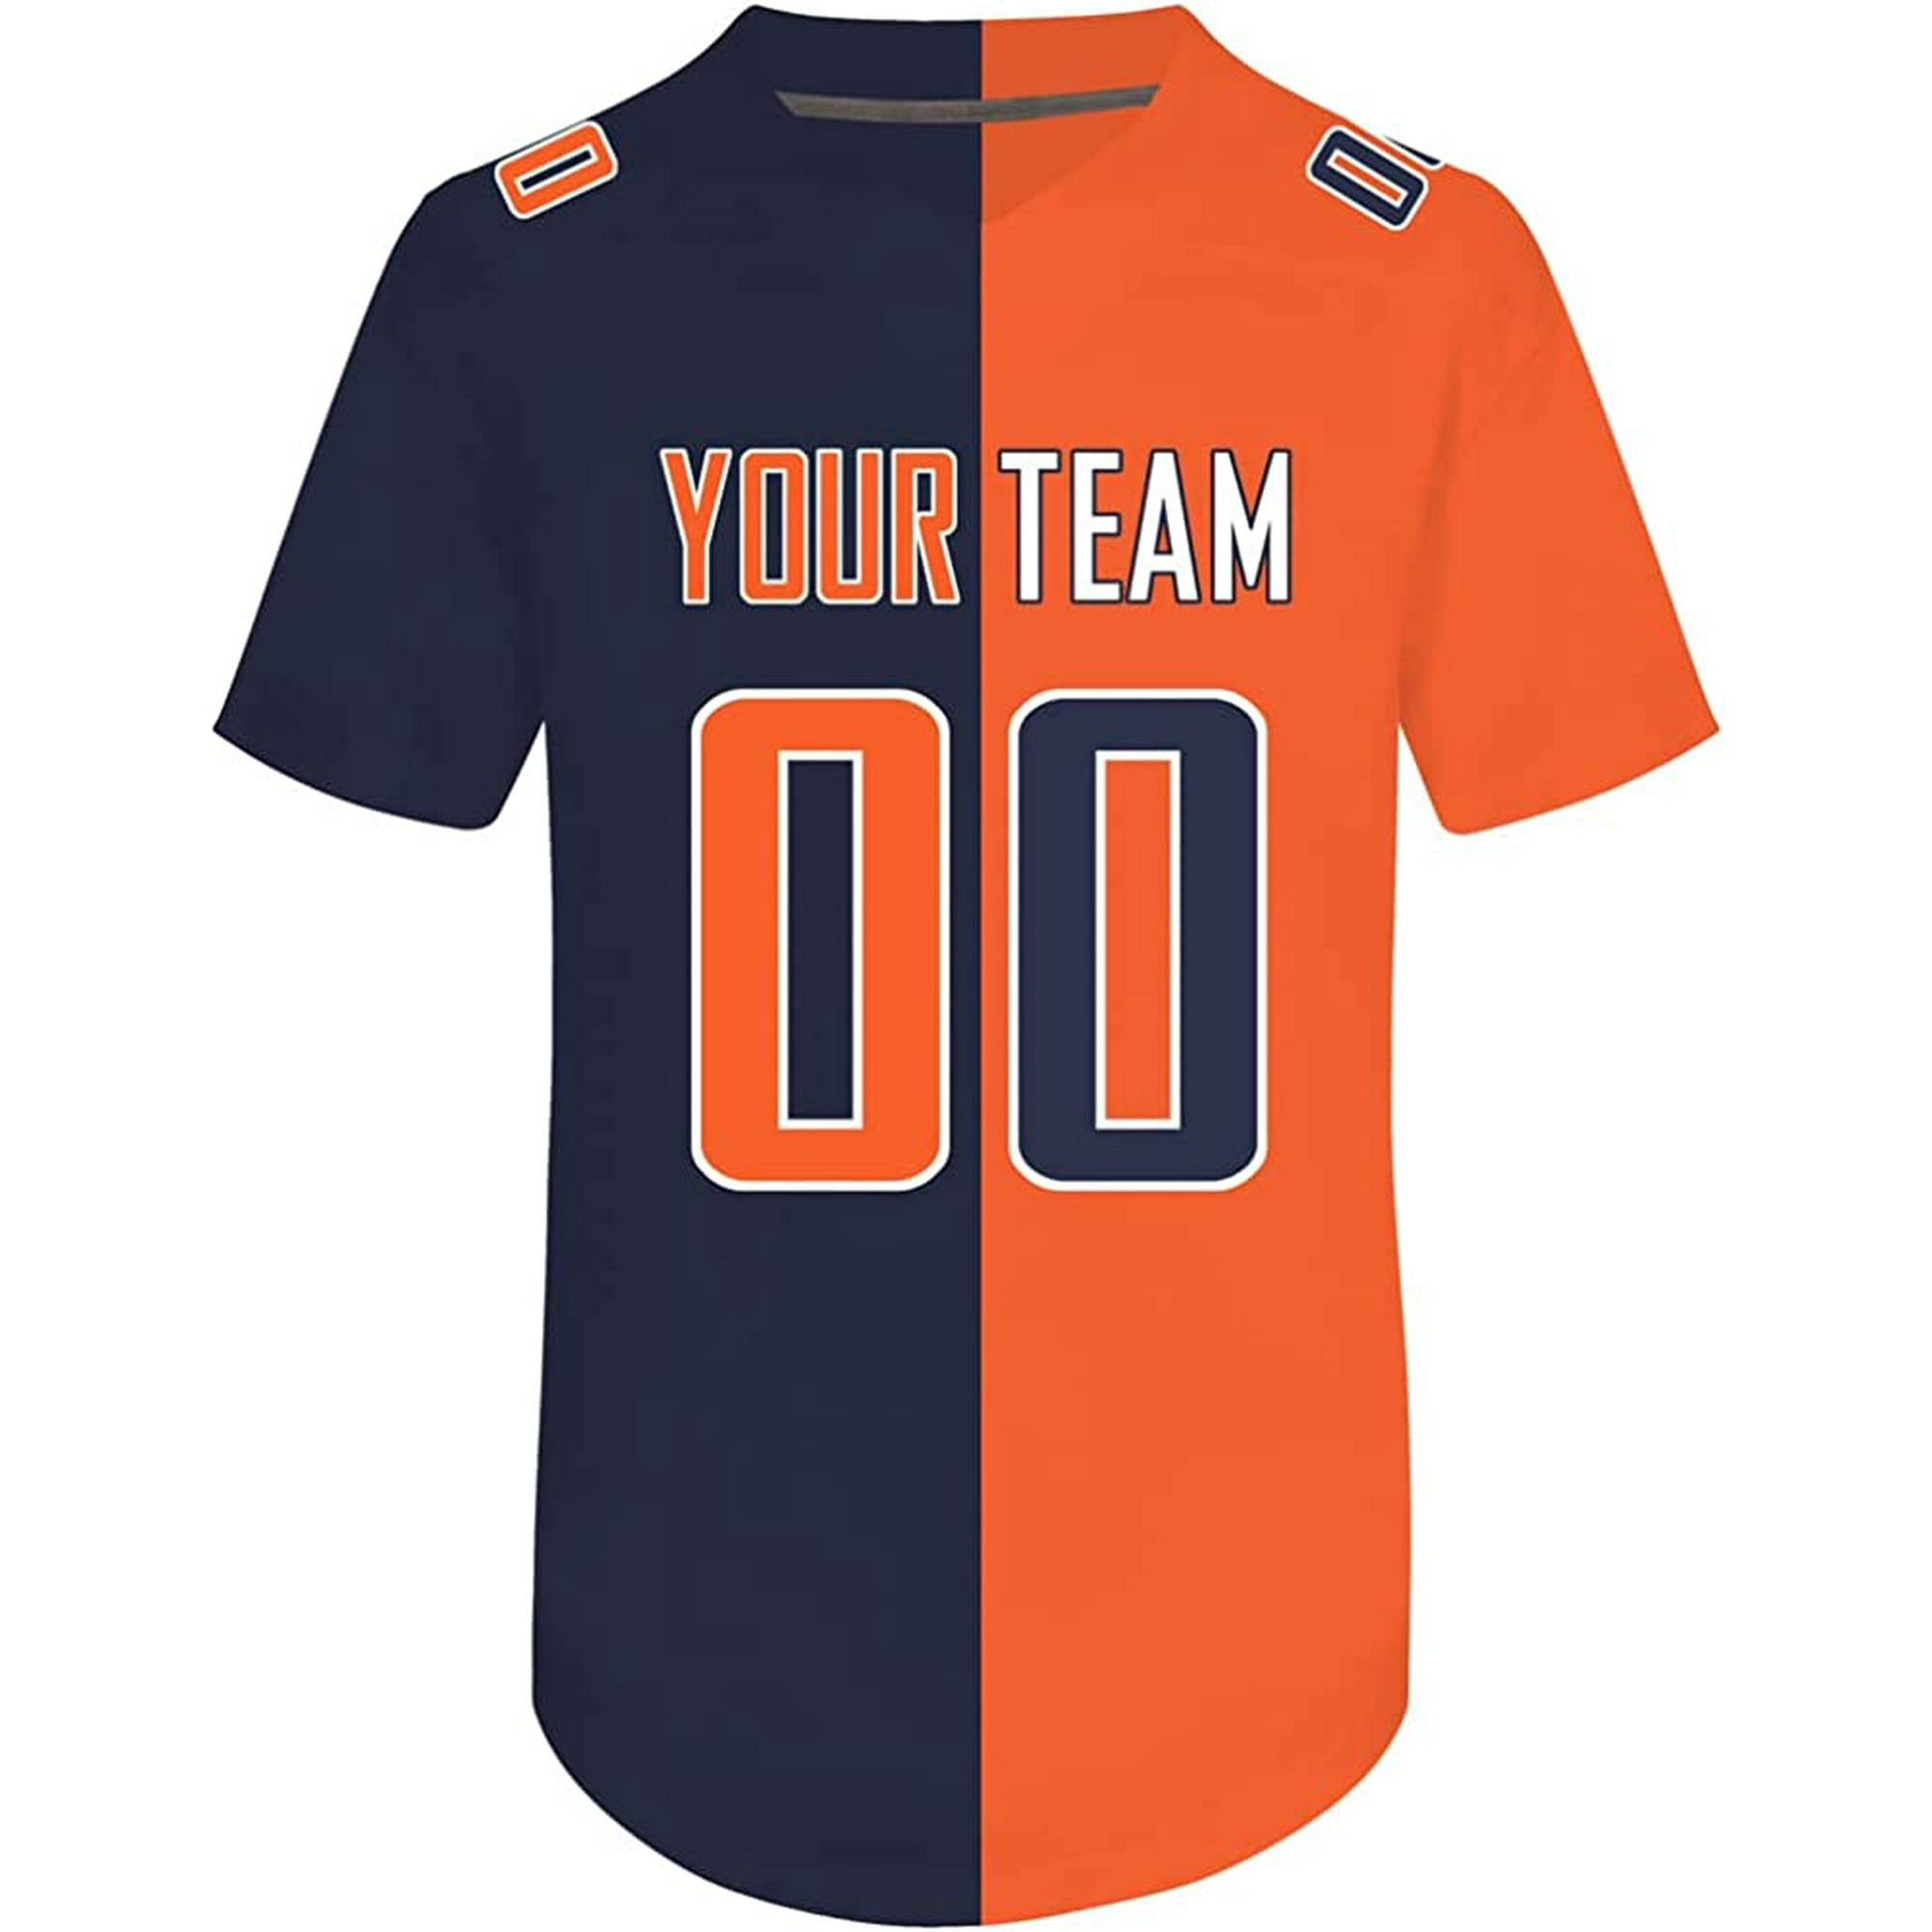 Create your own football jersey with custom name and number